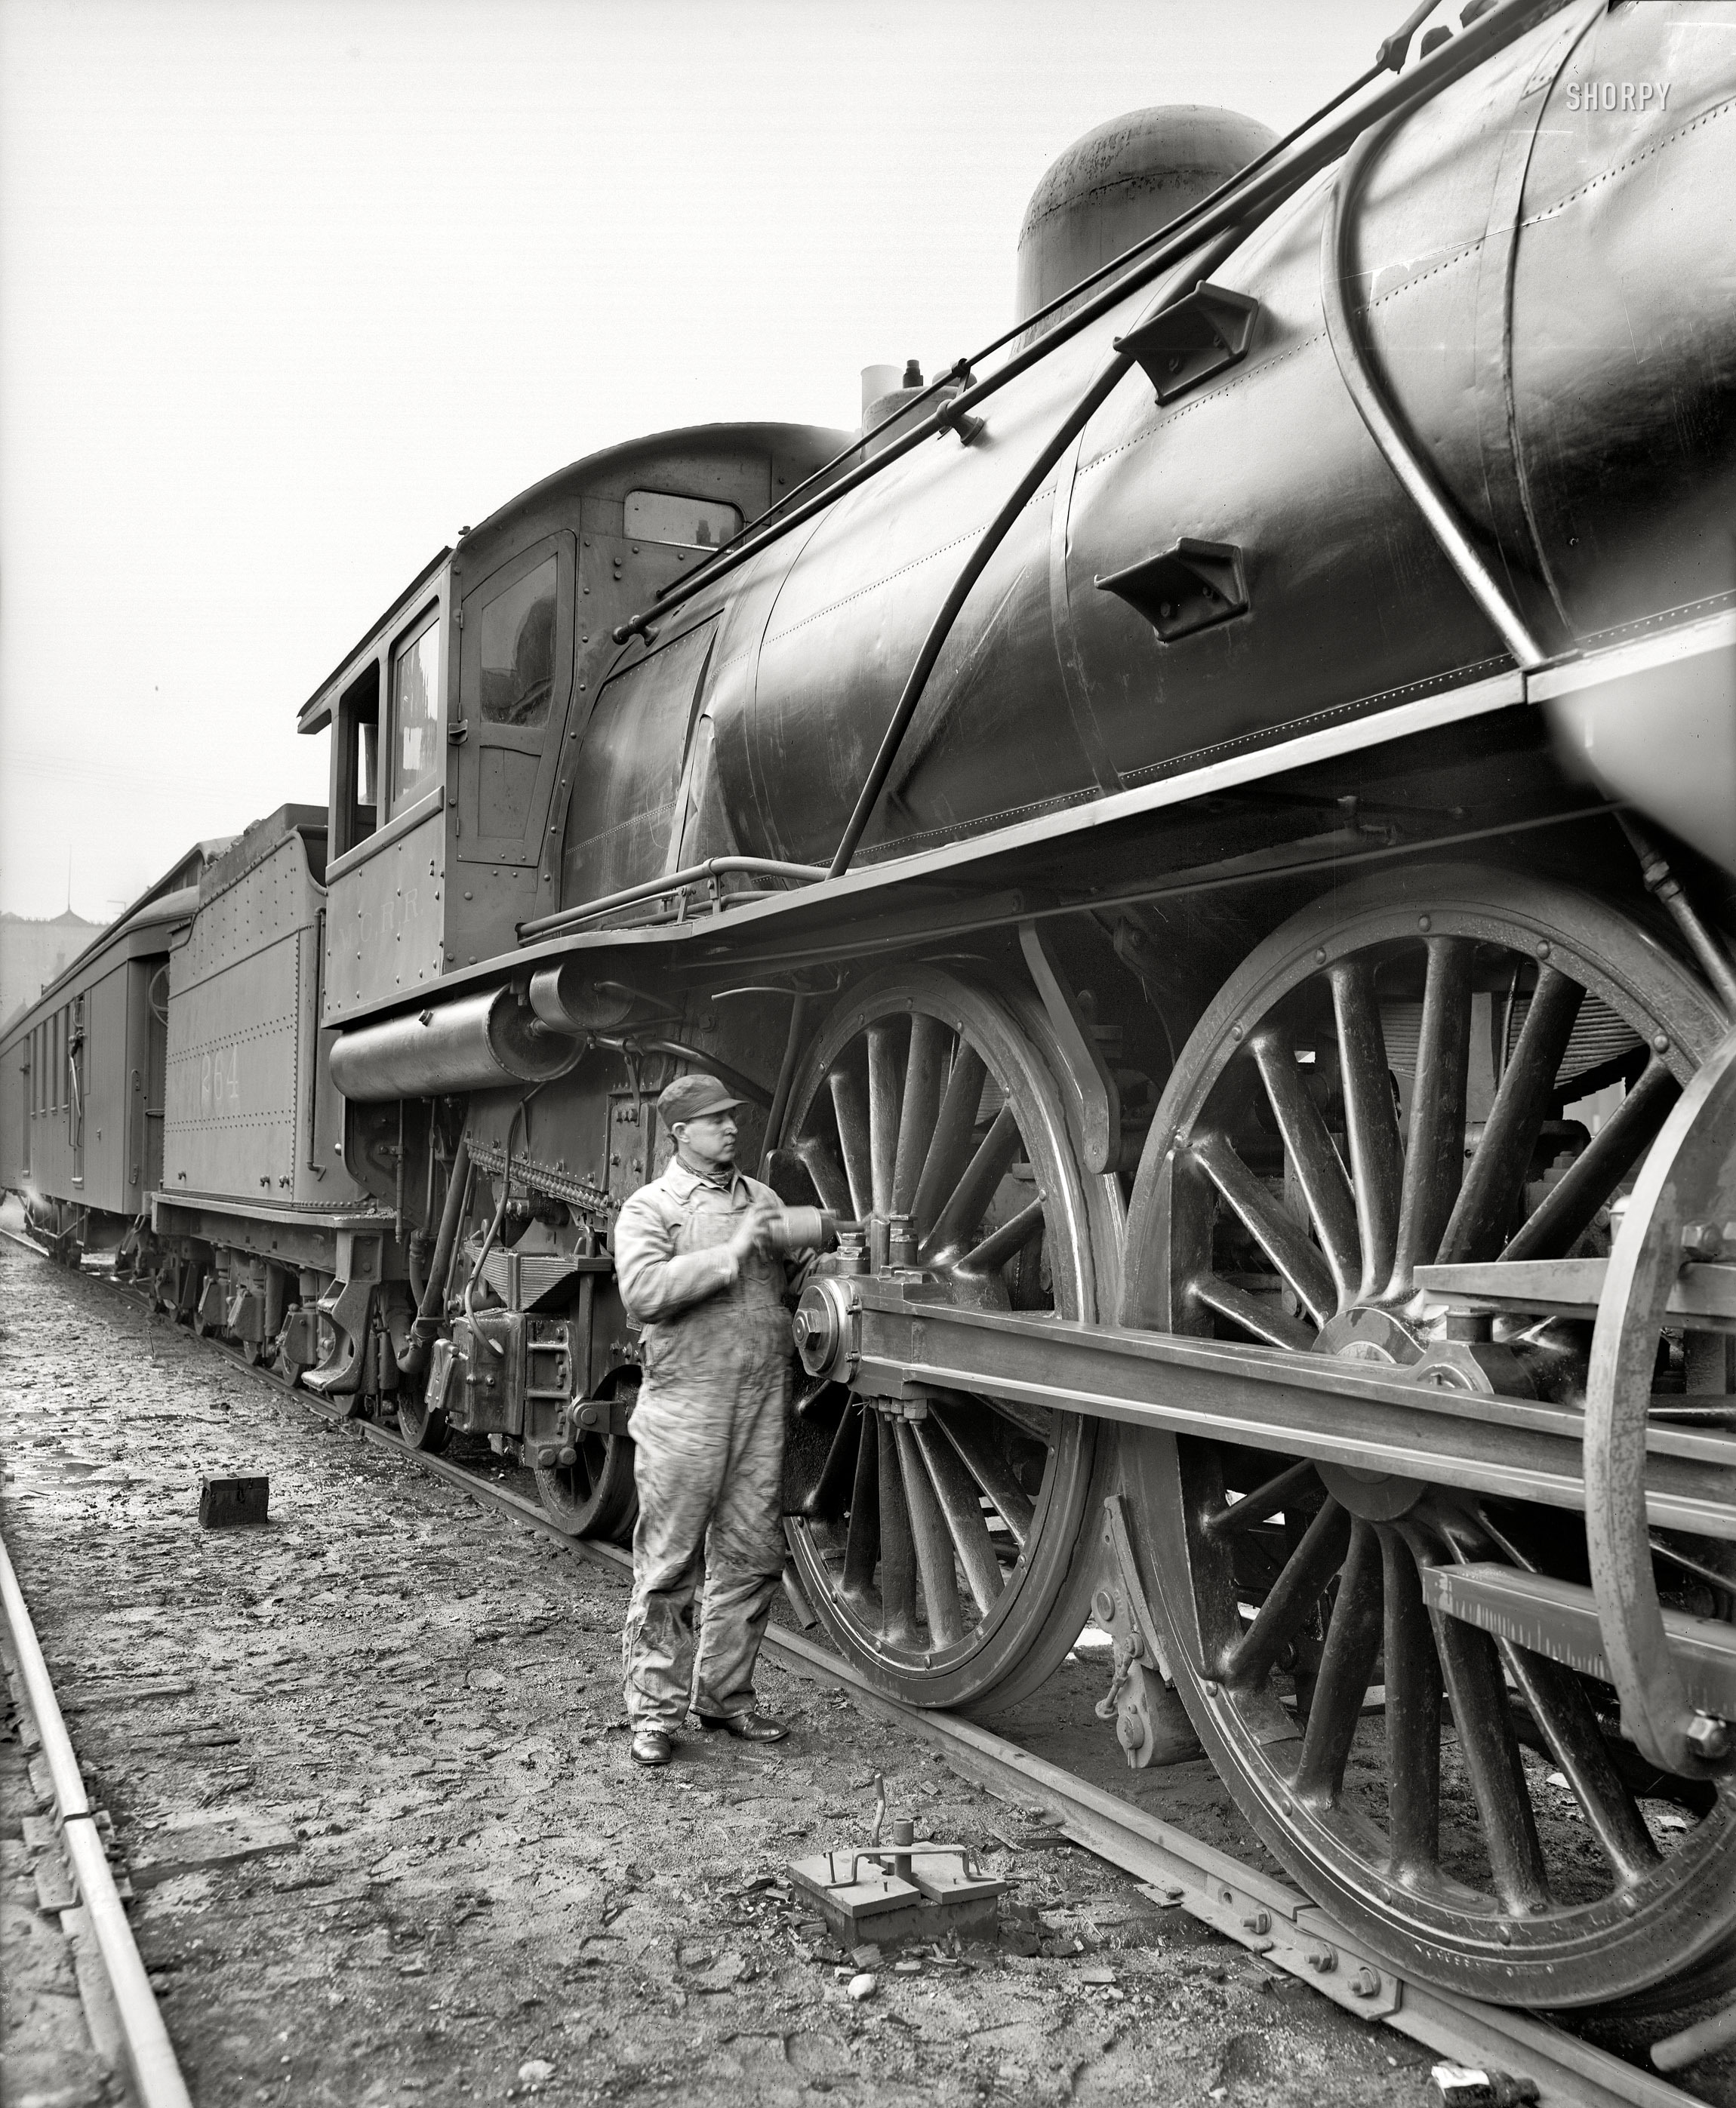 Circa 1904. "Michigan Central Railroad engineer oiling up before the start." 8x10 inch dry plate glass negative, Detroit Publishing Company. View full size.